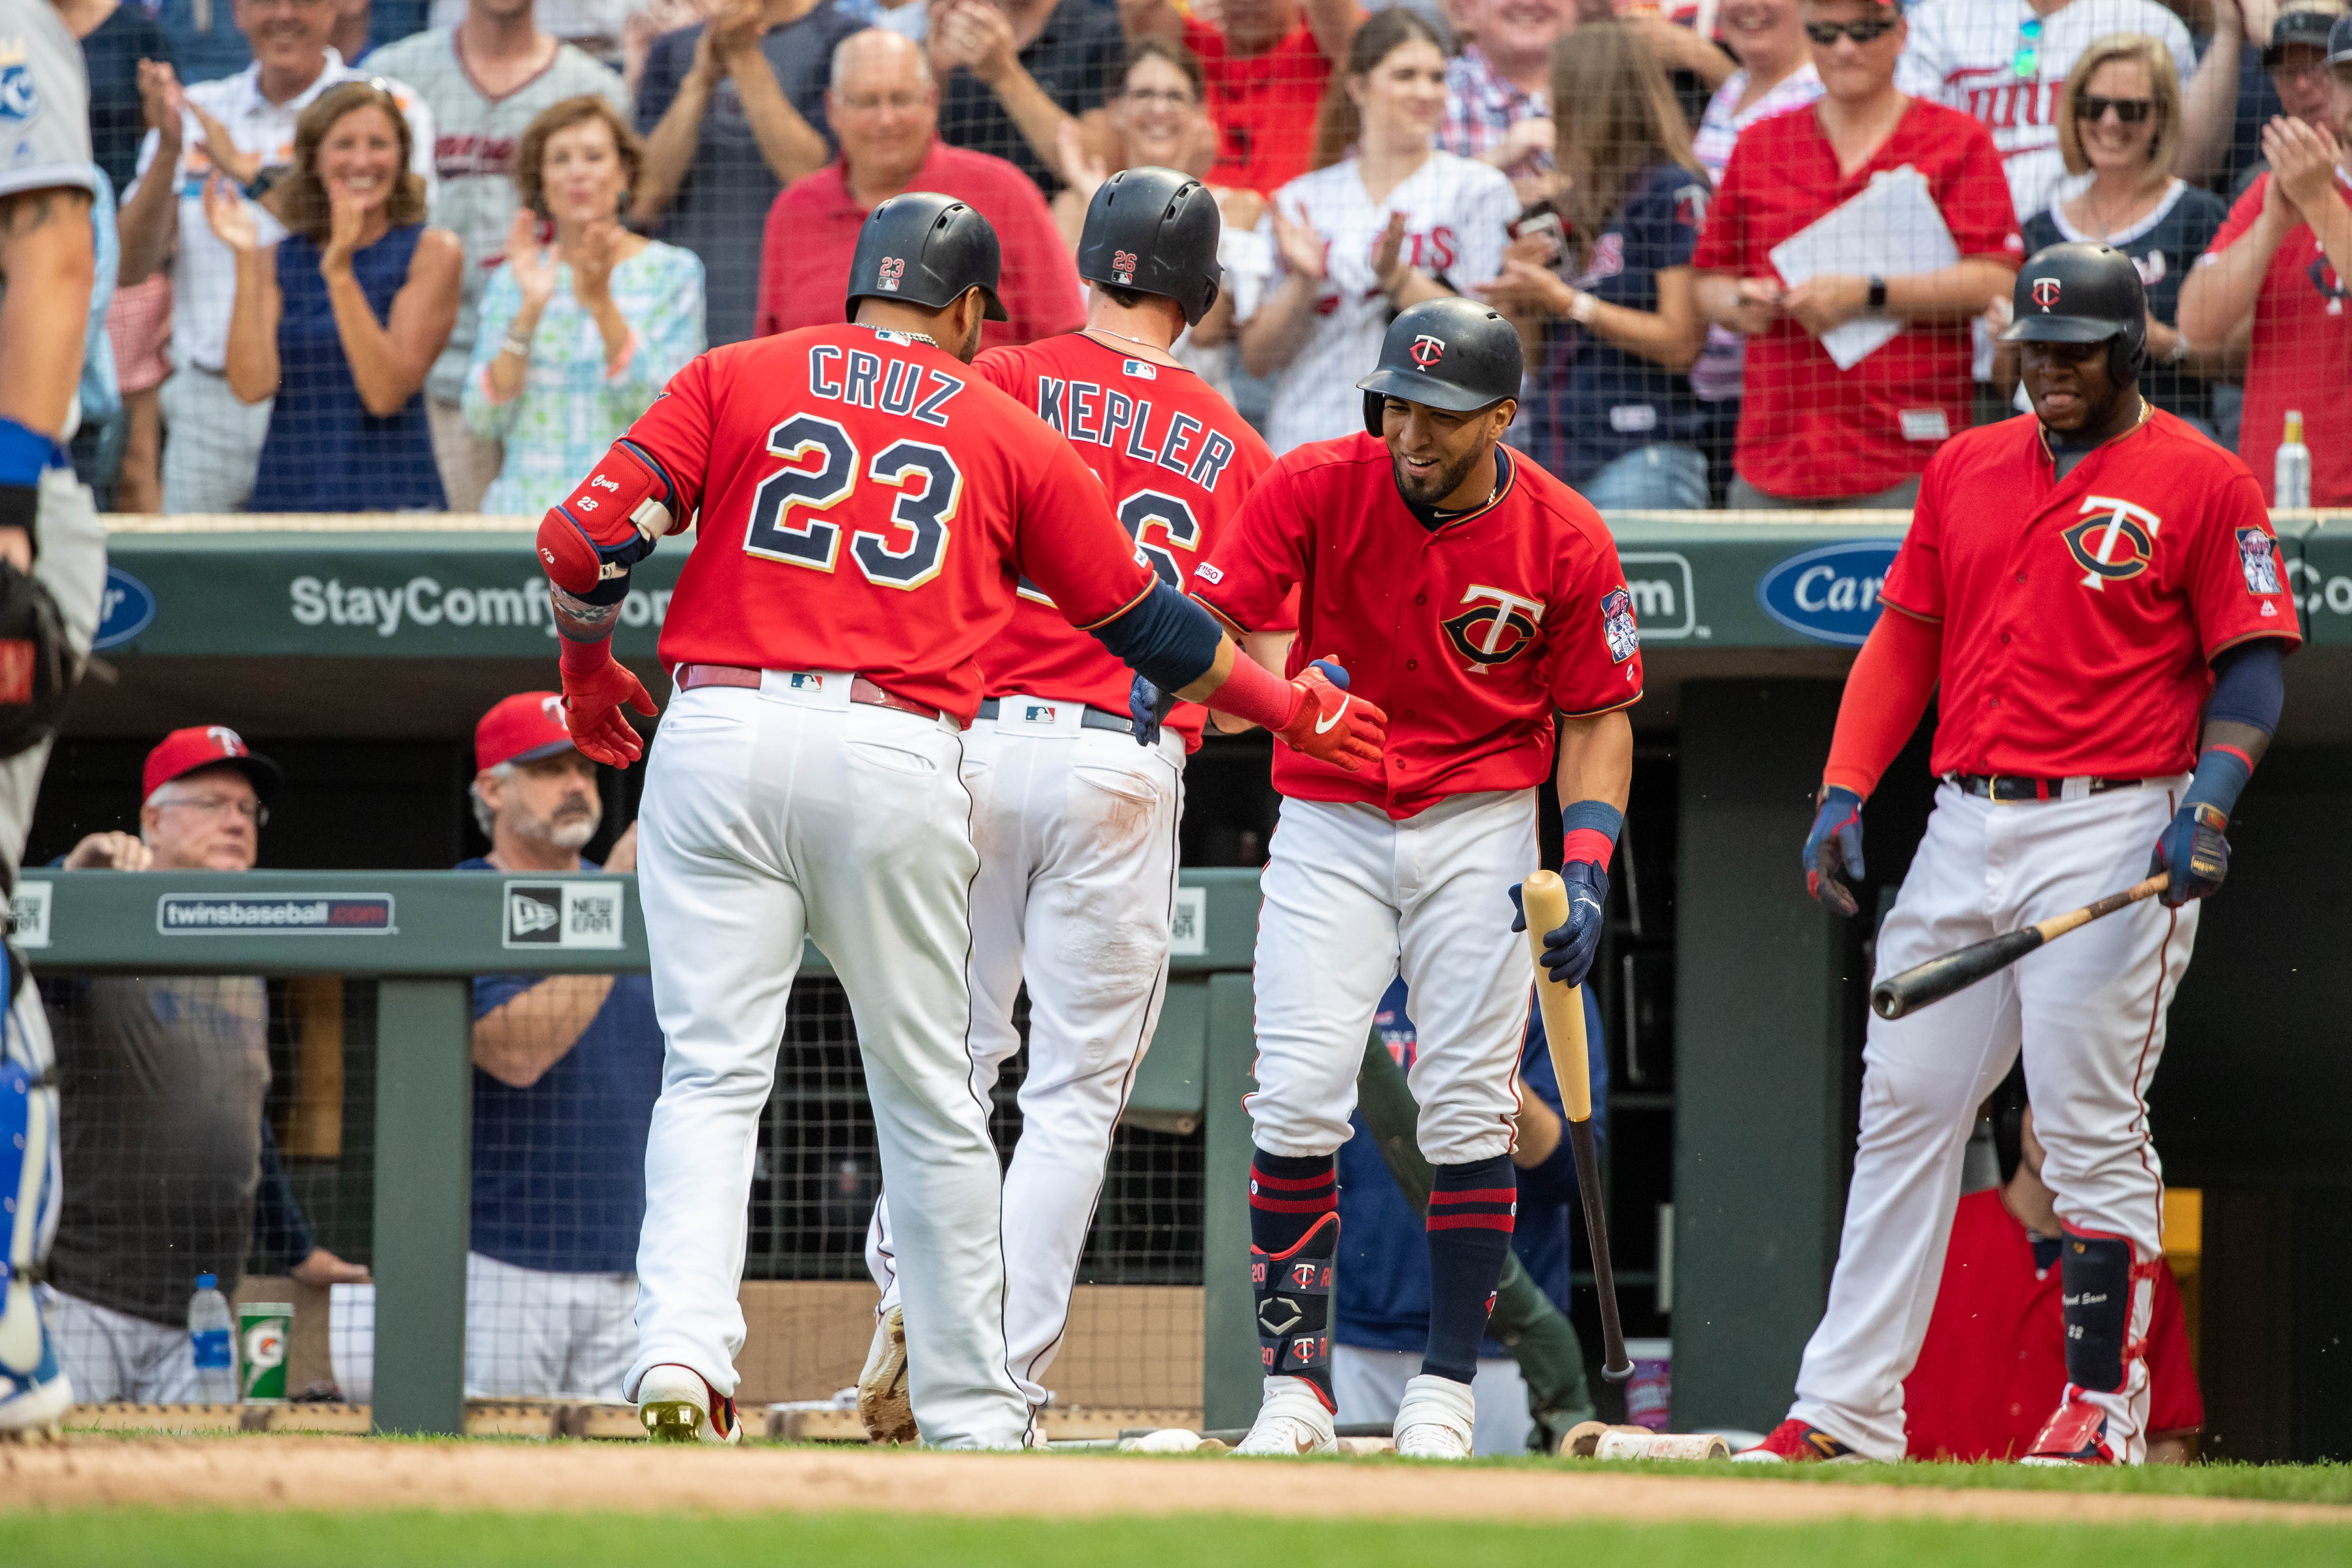 The Minnesota Twins have made home run history this year. But can they bash their way through October?